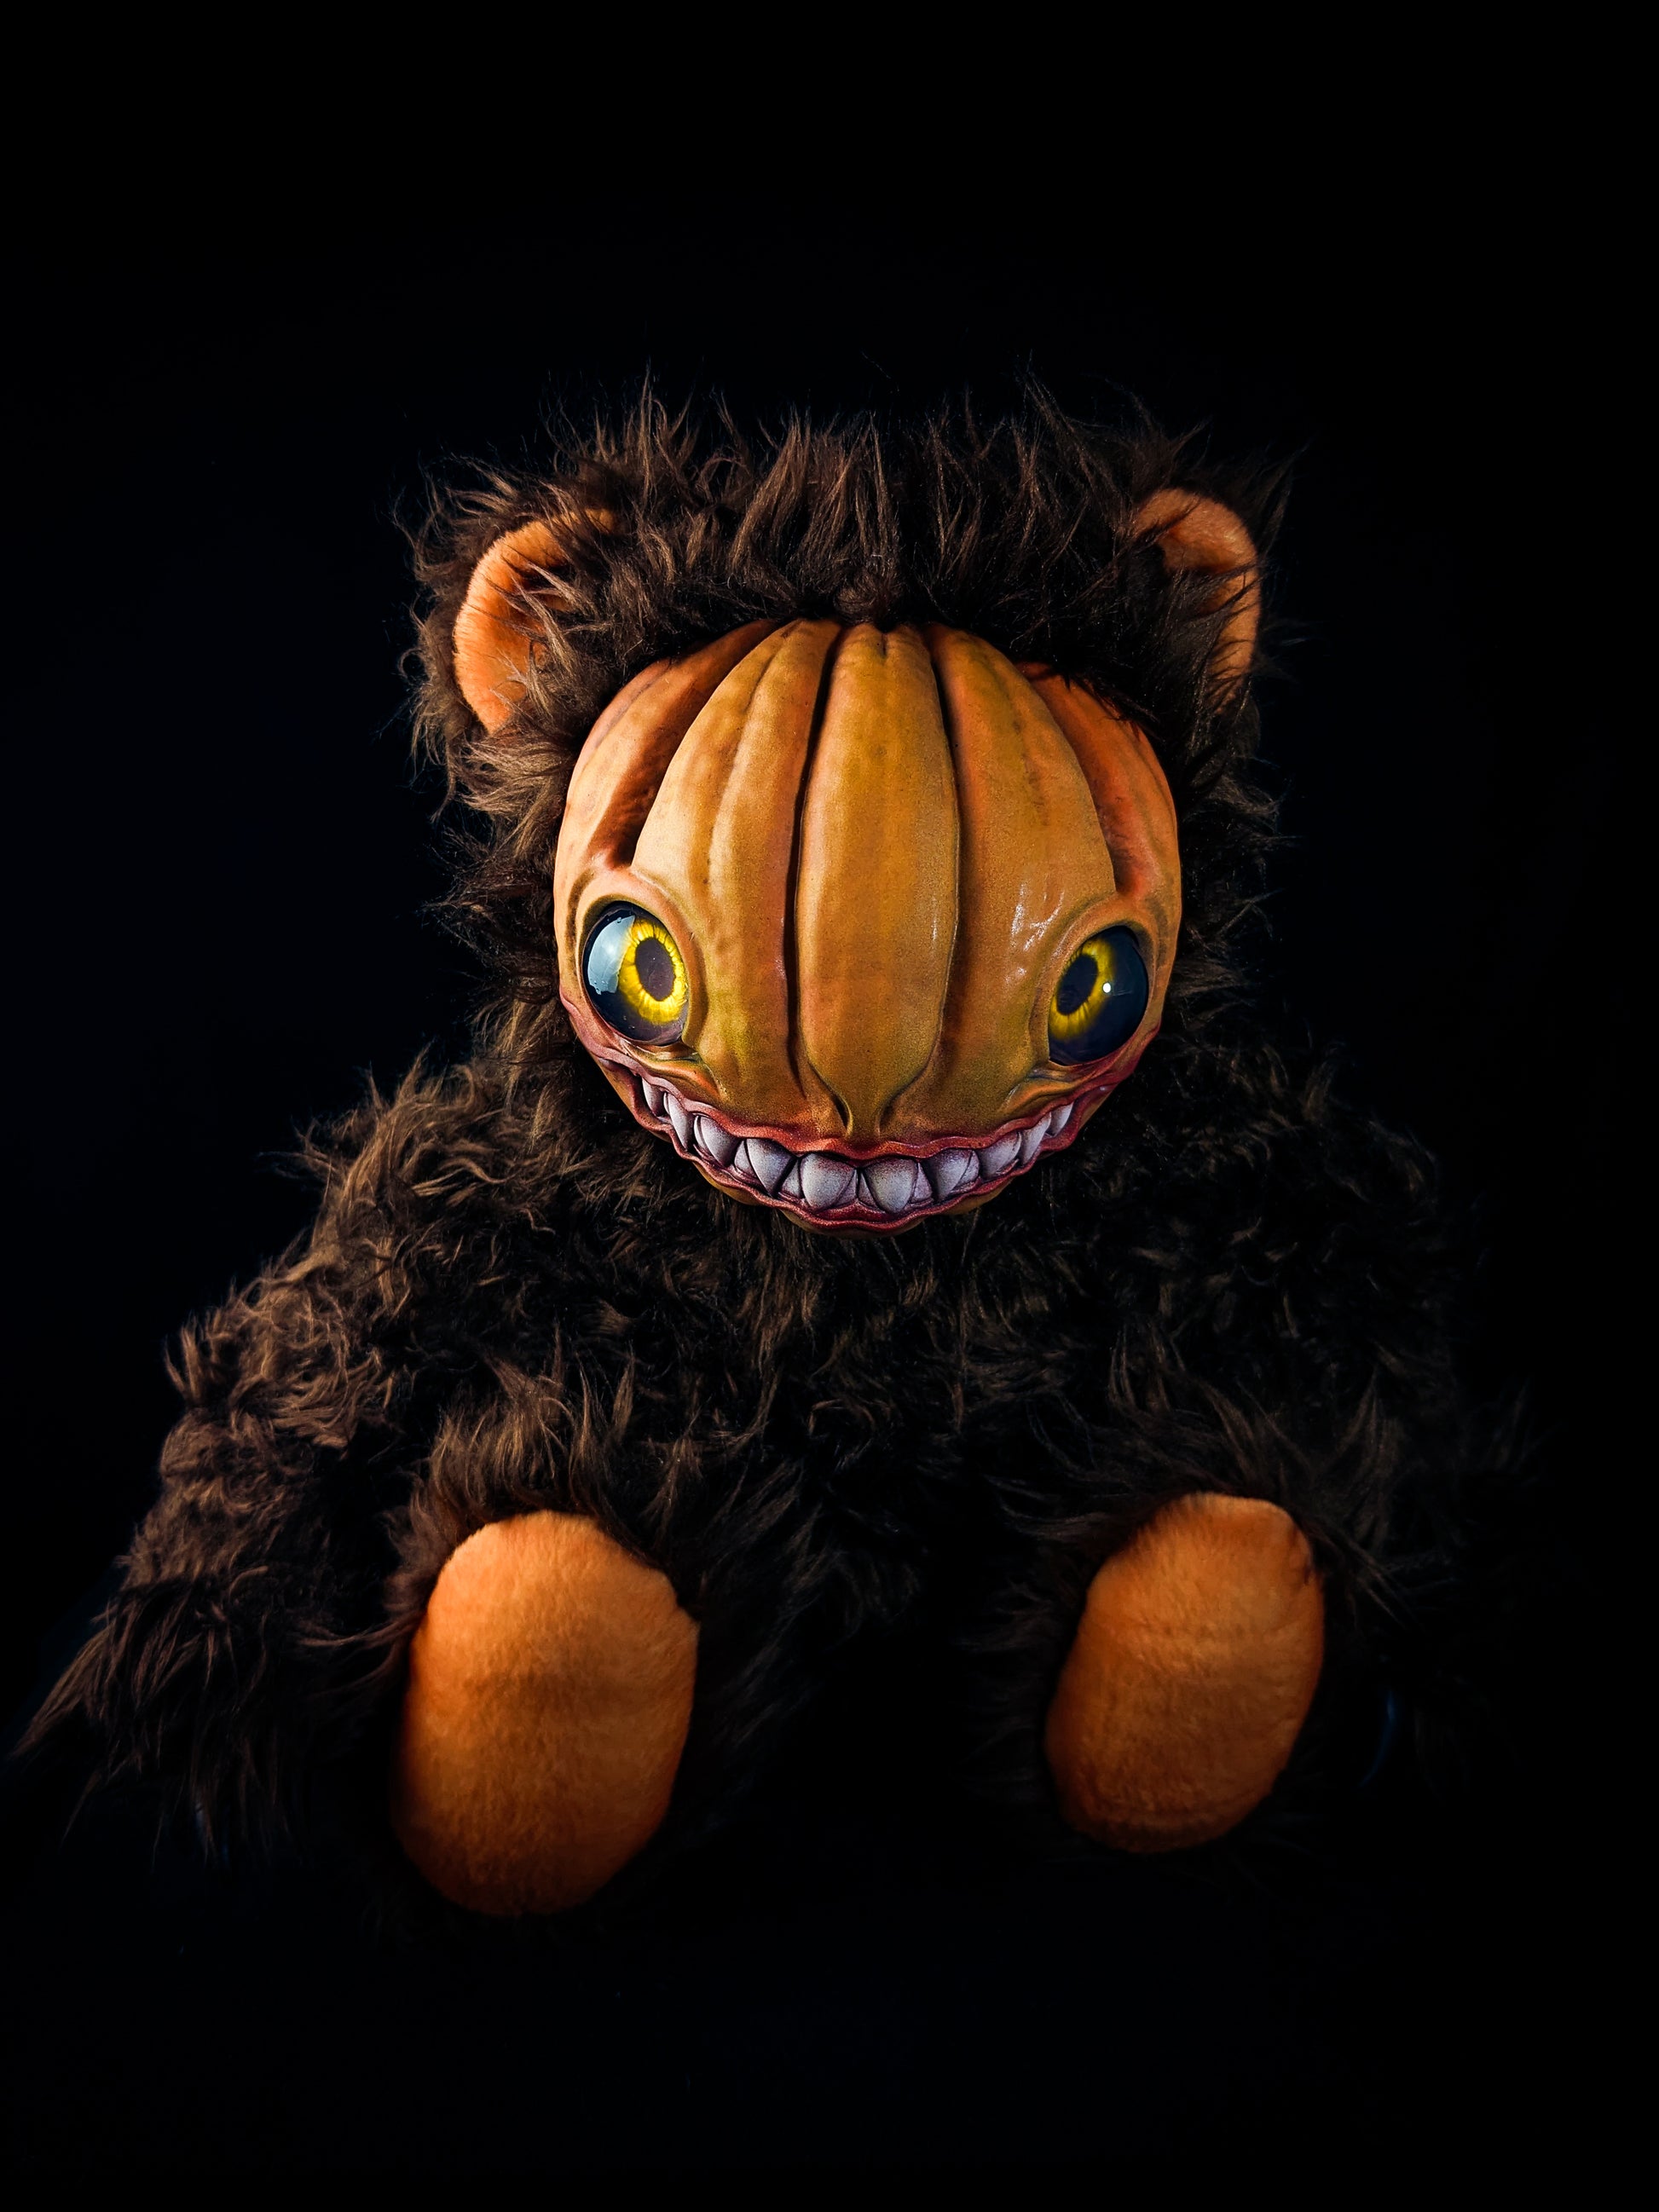 Pulp Masher: HAUNTVESTER - CRYPTCRITZ Handcrafted Creepy Cute Halloween Pumpkin Art Doll Plush Toy for Spooky Souls